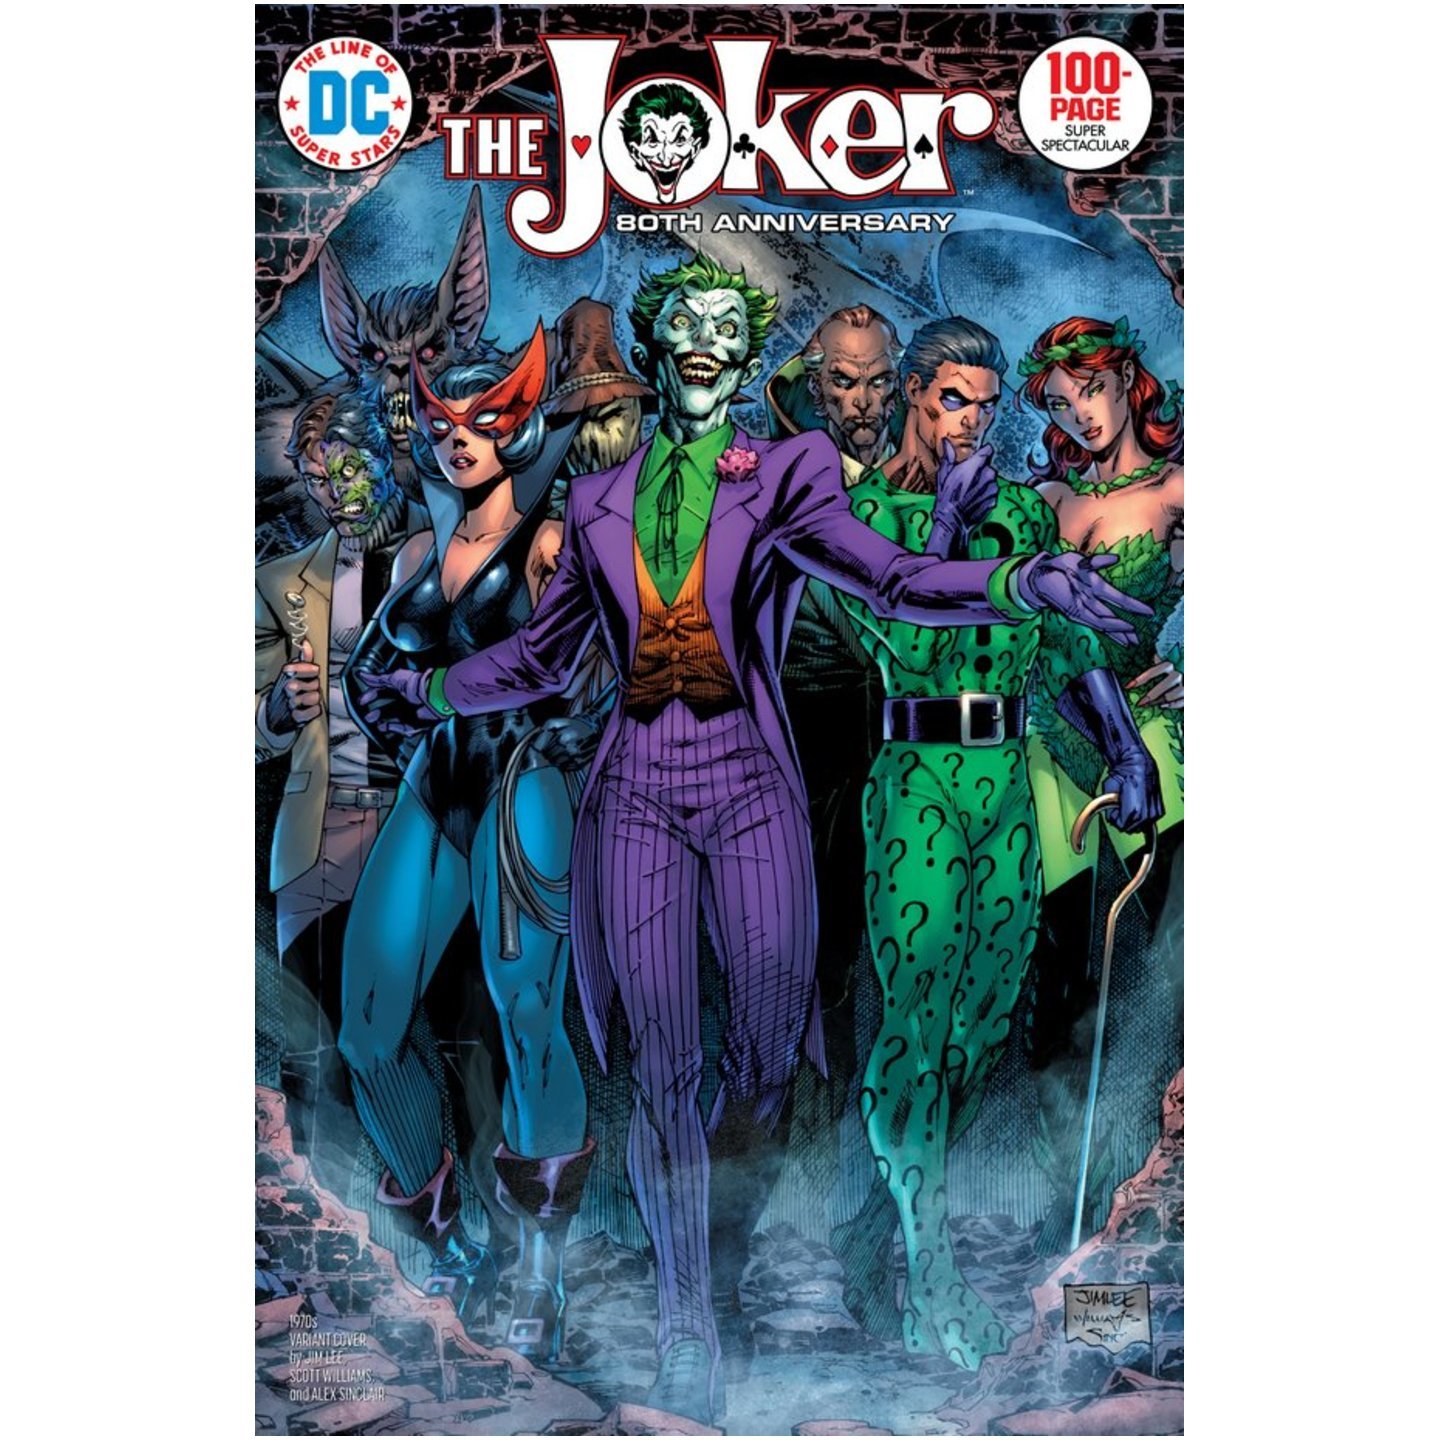 THE JOKER 80TH ANNIVERSARY 100-PAGE SUPER SPECTACULAR #1 1970S VARIANT EDITION